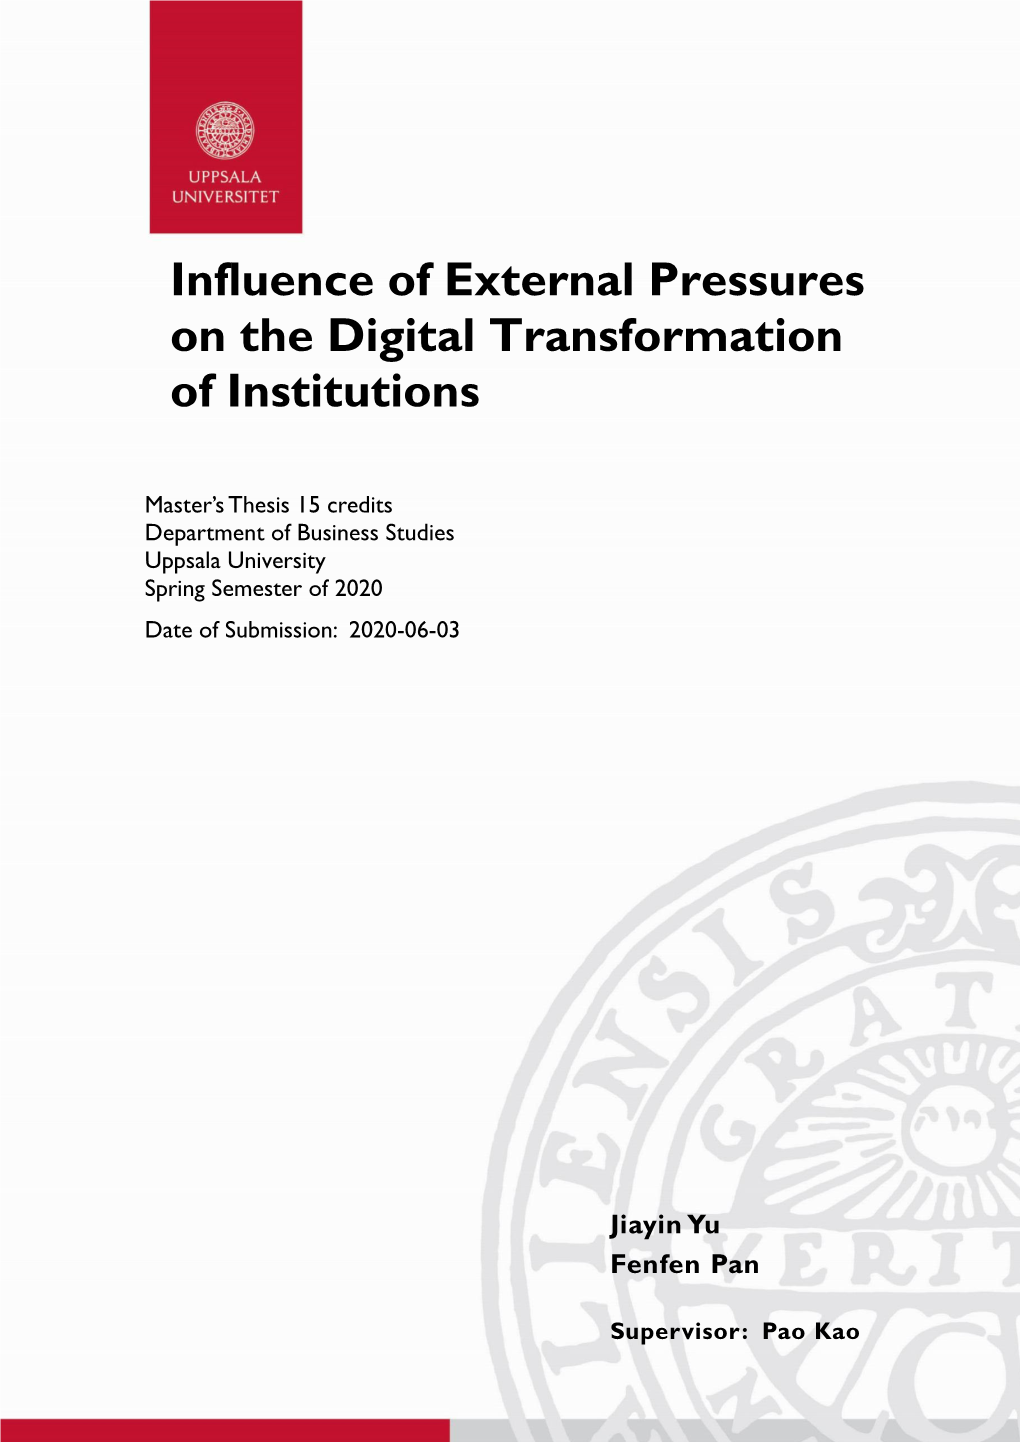 Influence of External Pressures on the Digital Transformation of Institutions